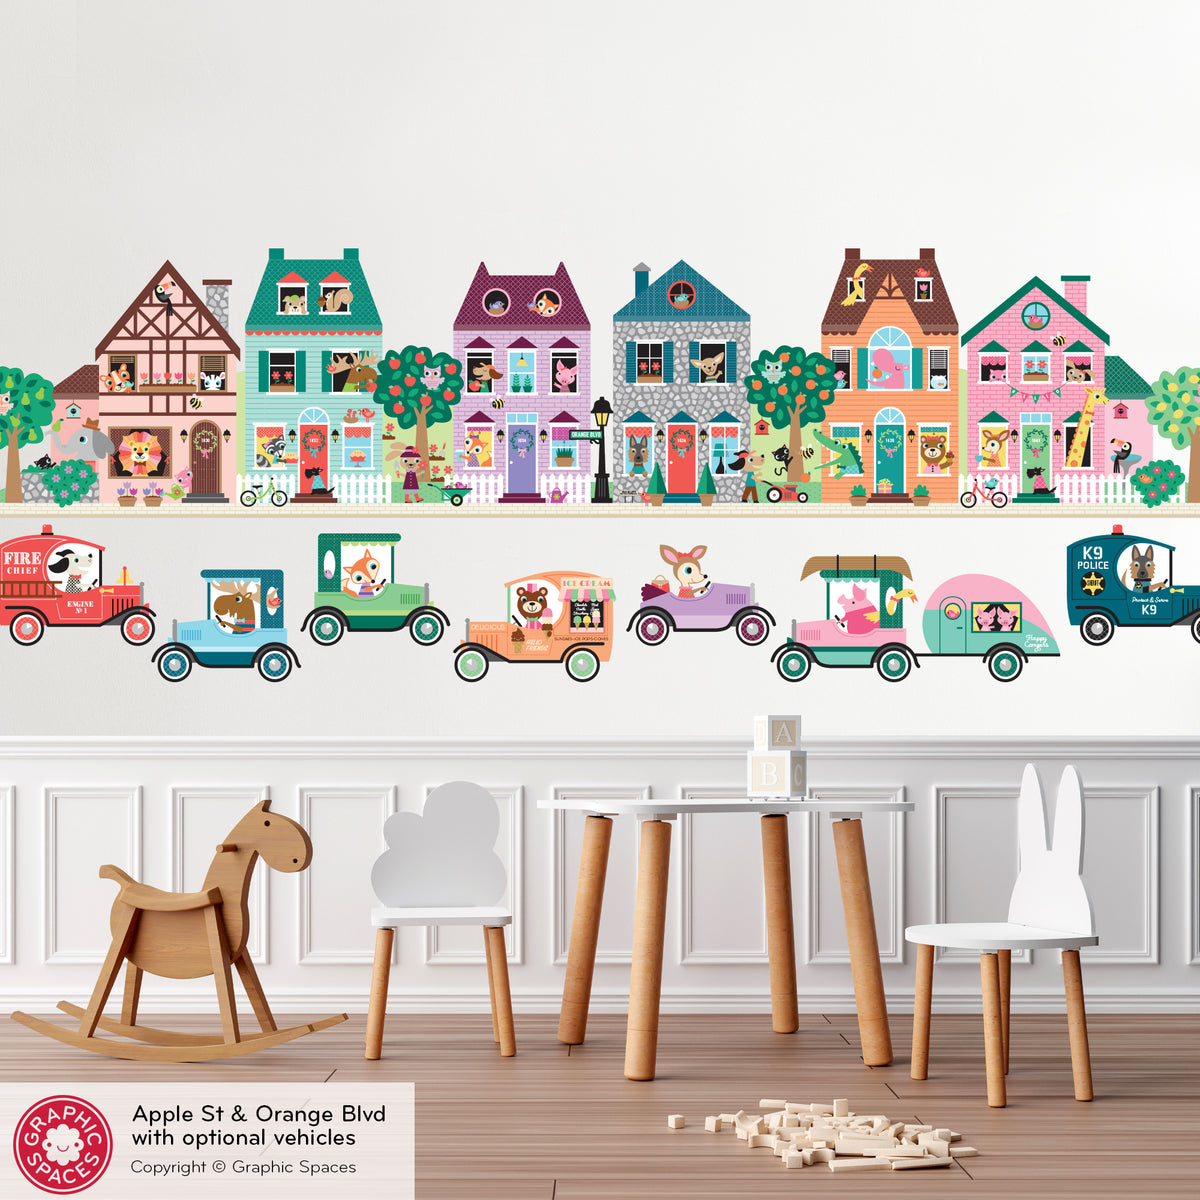 Happy Town Houses Fabric Wall Decals - Orange Blvd